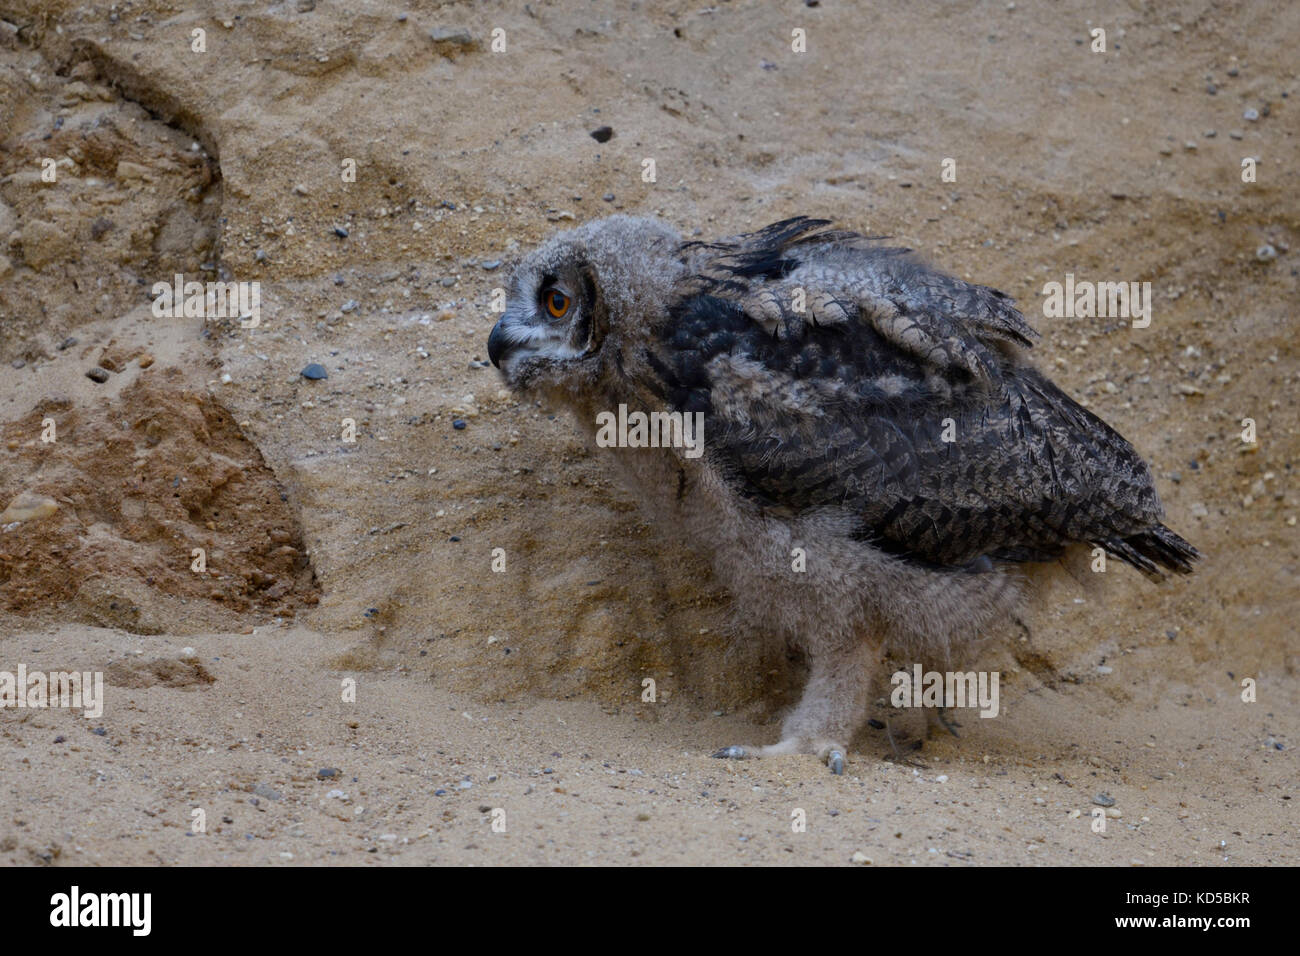 Eurasian Eagle Owl / Europaeischer Uhu ( Bubo bubo ), young chick, owlet in a sand pit, exploring its surrounding, at dusk, wildlife, Europe. Stock Photo